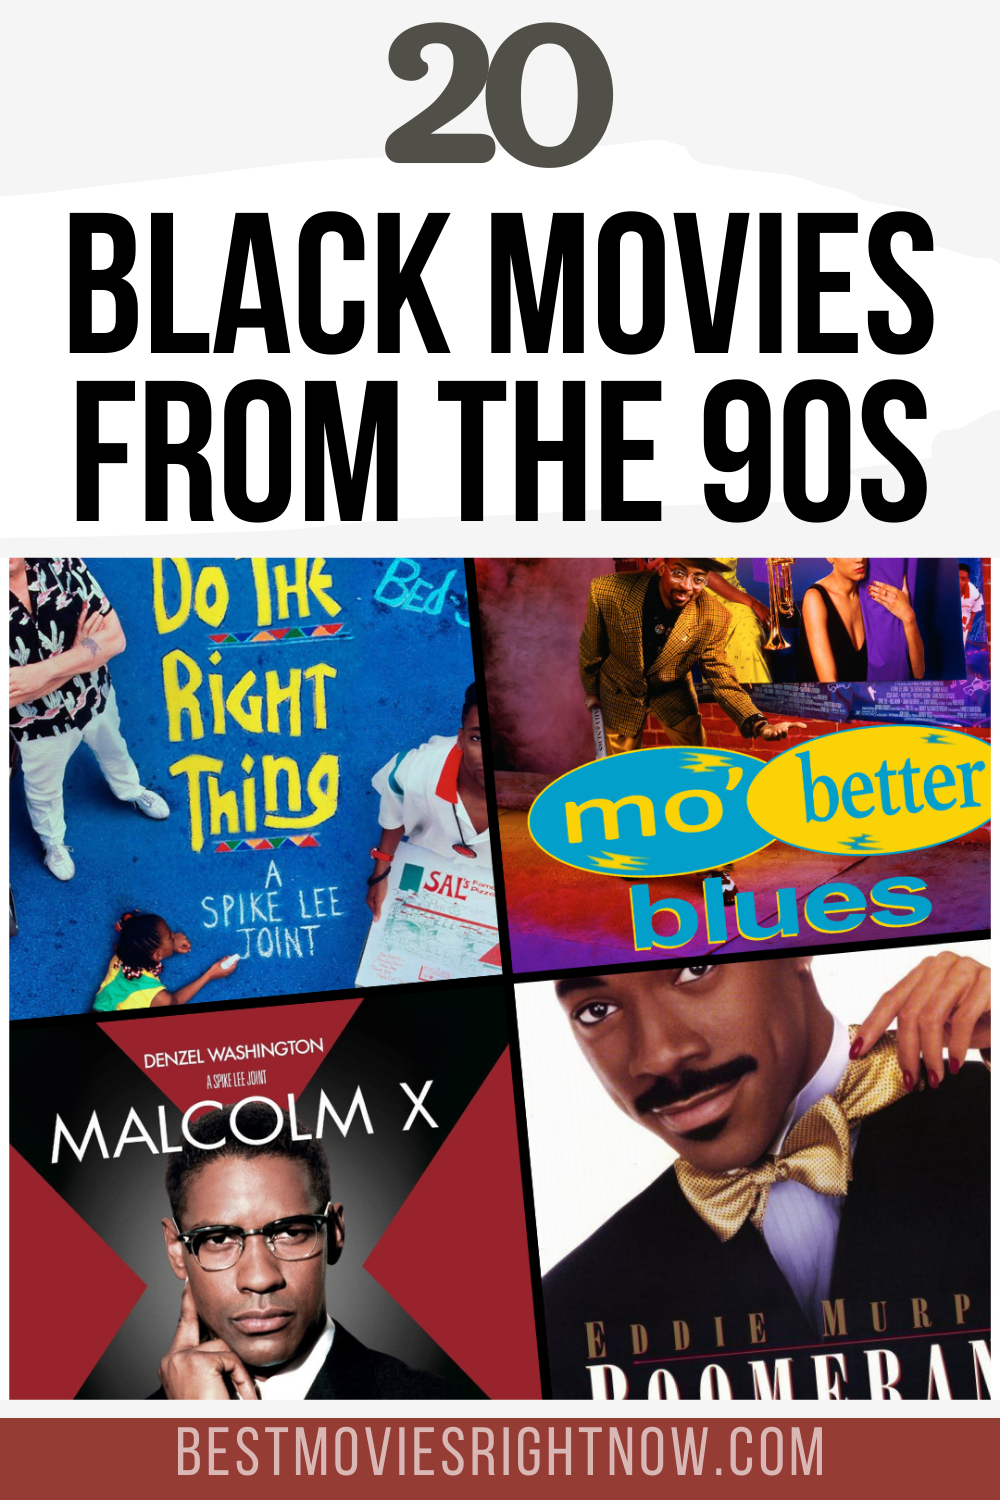 Black Movies from the 90s pin sized image with text